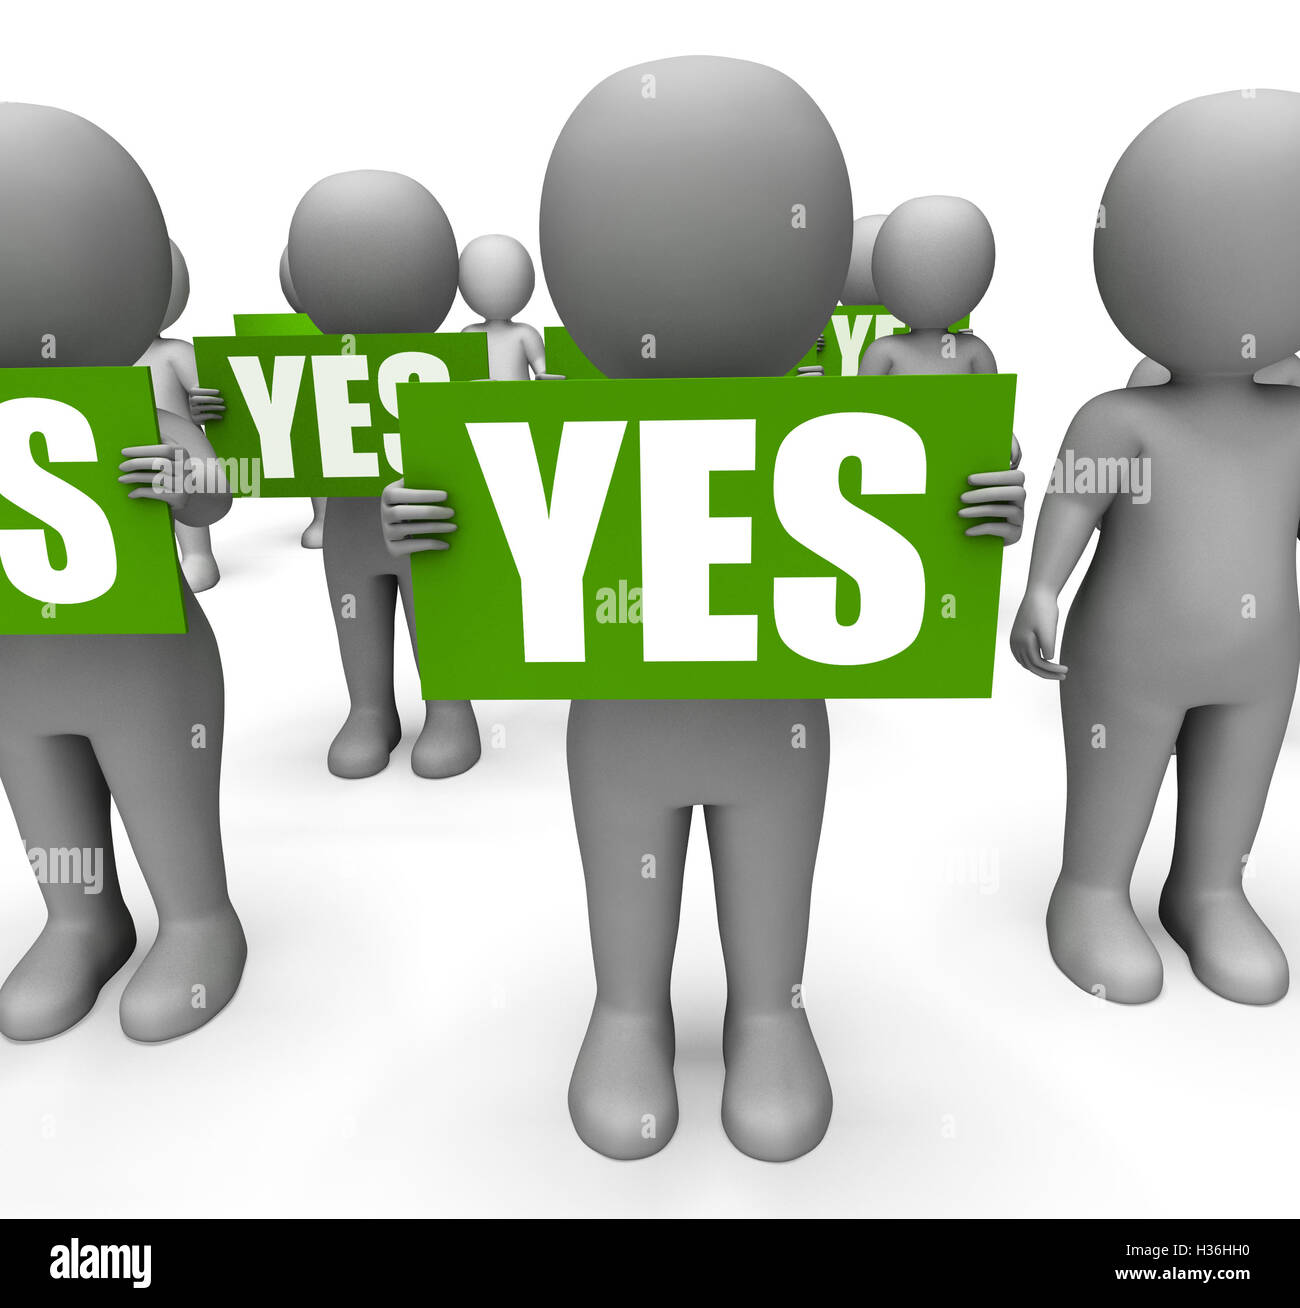 Characters Holding Yes Signs Mean Agreement And Confirmation Stock Photo